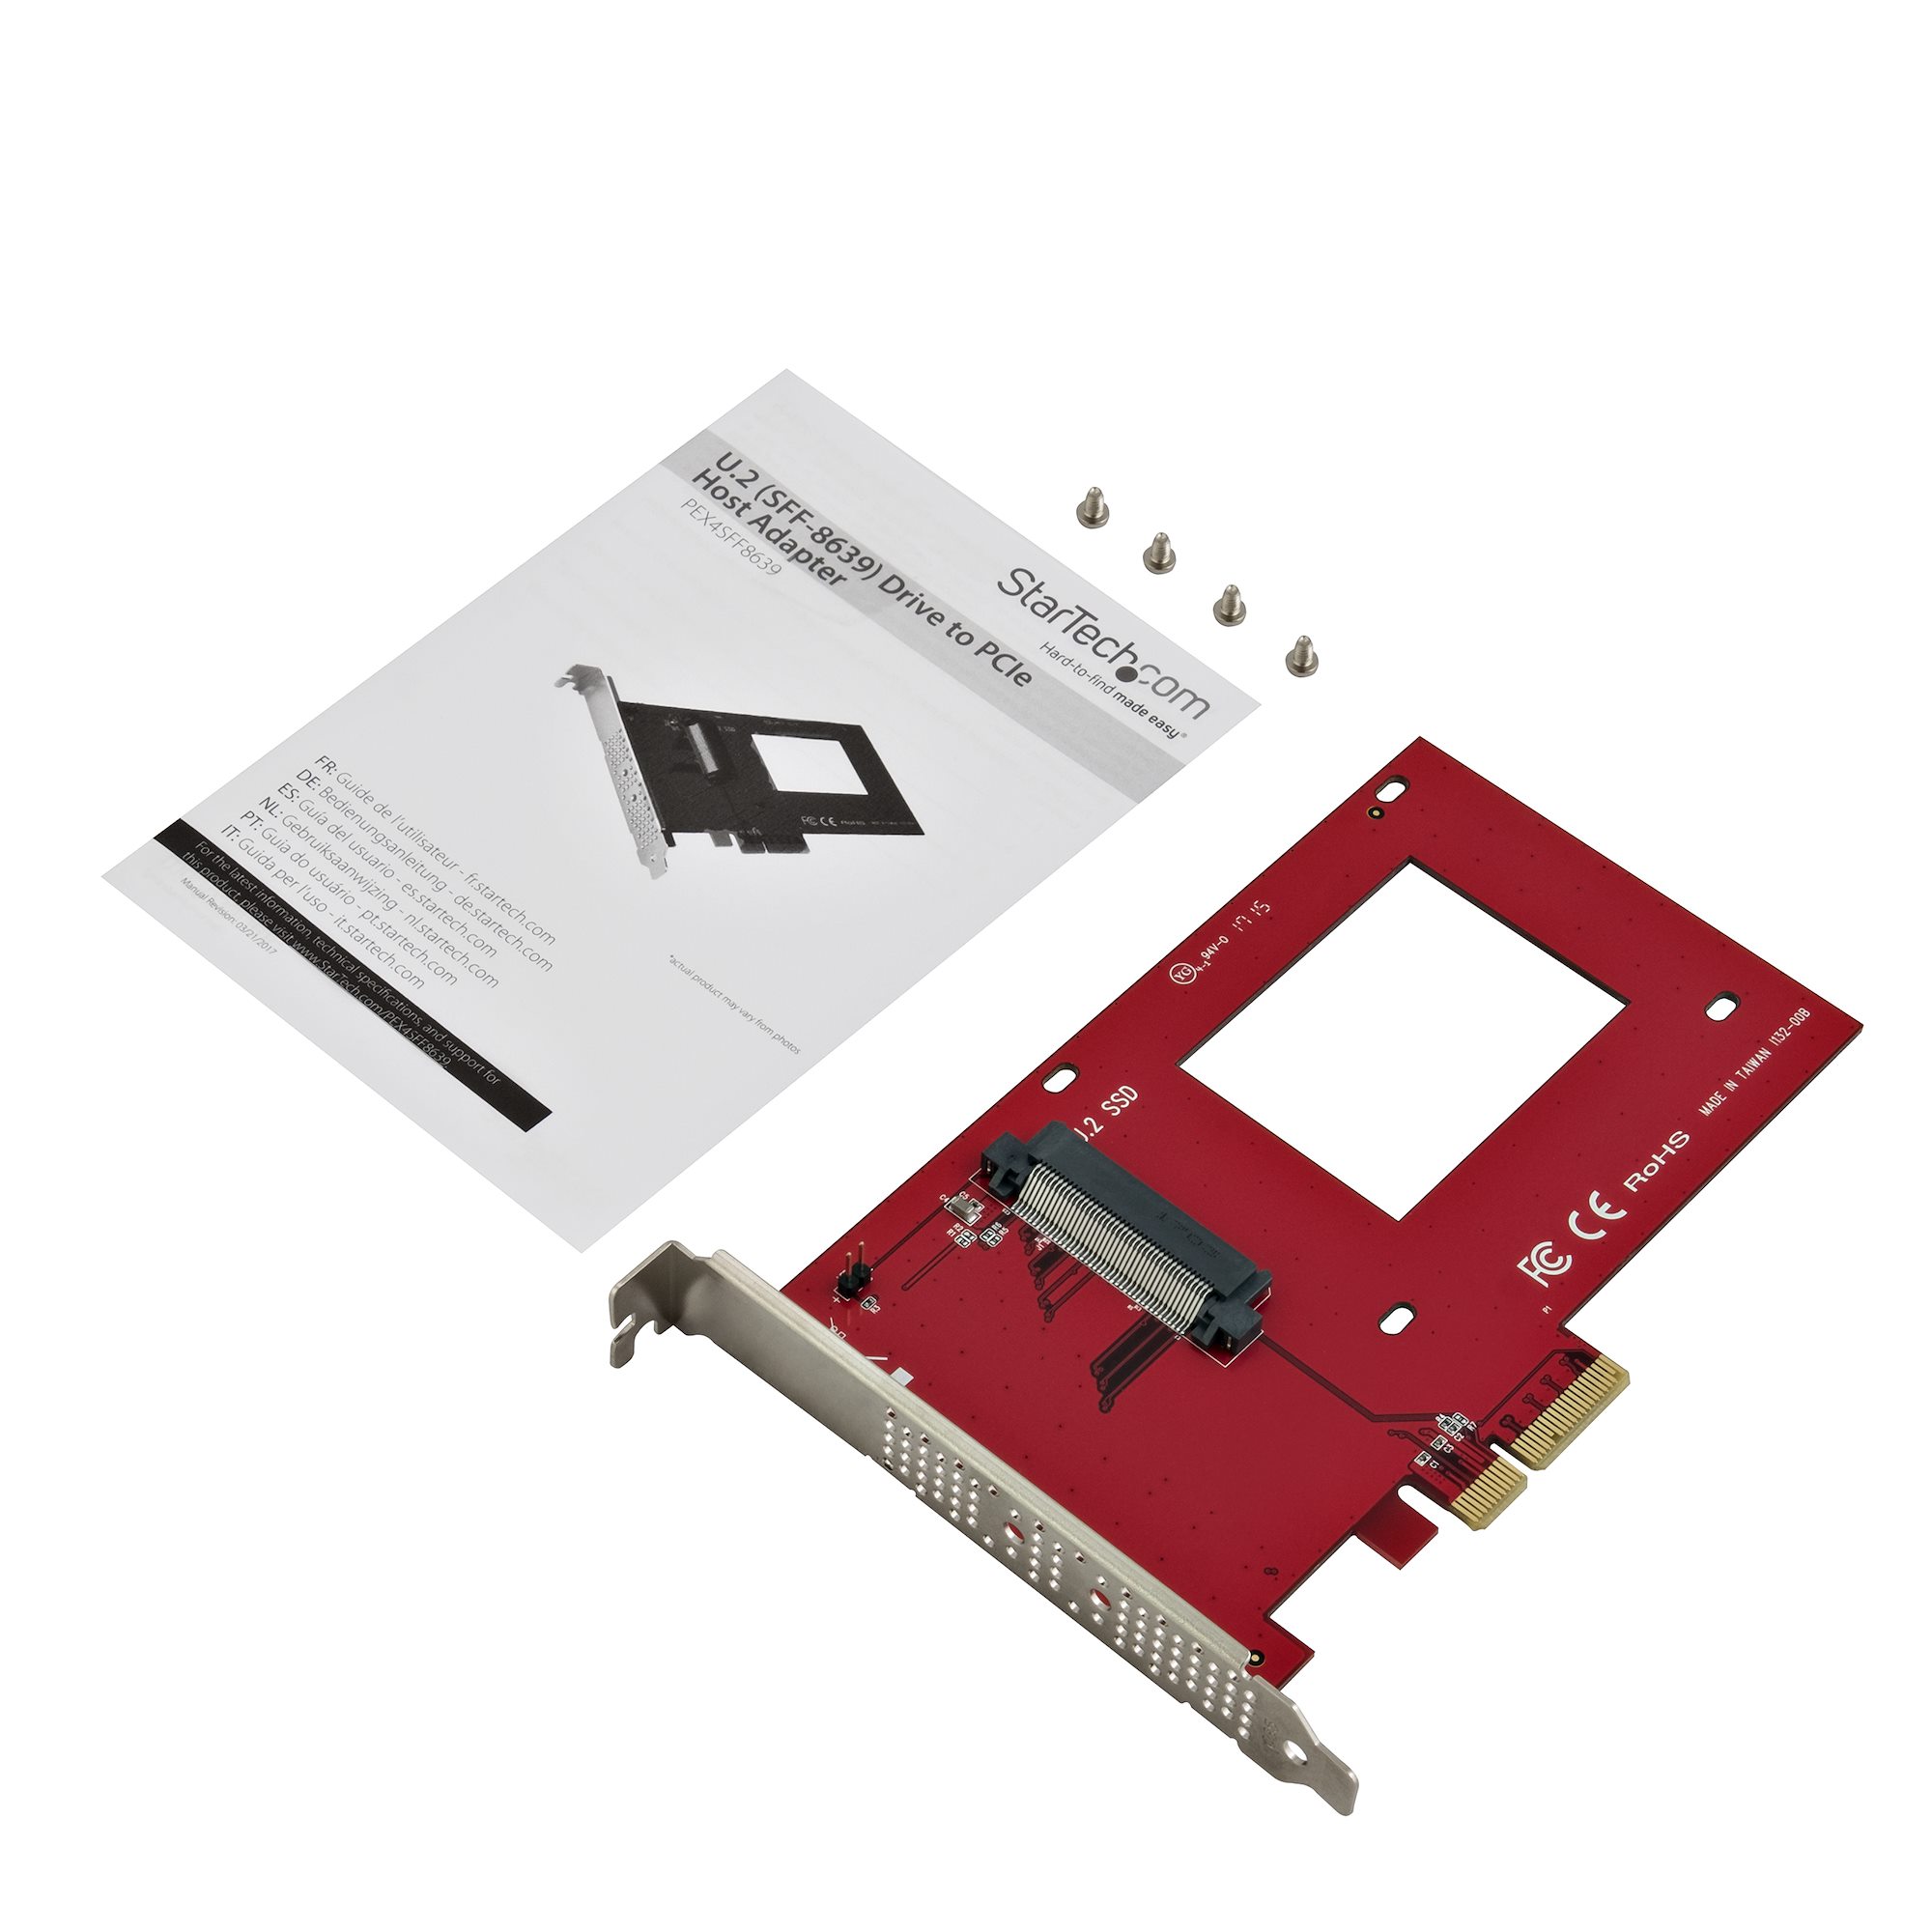 Adapter, M.2 to U.2 - M.2 PCIe NVMe SSDs - Drive Adapters and Drive  Converters, Hard Drive Accessories